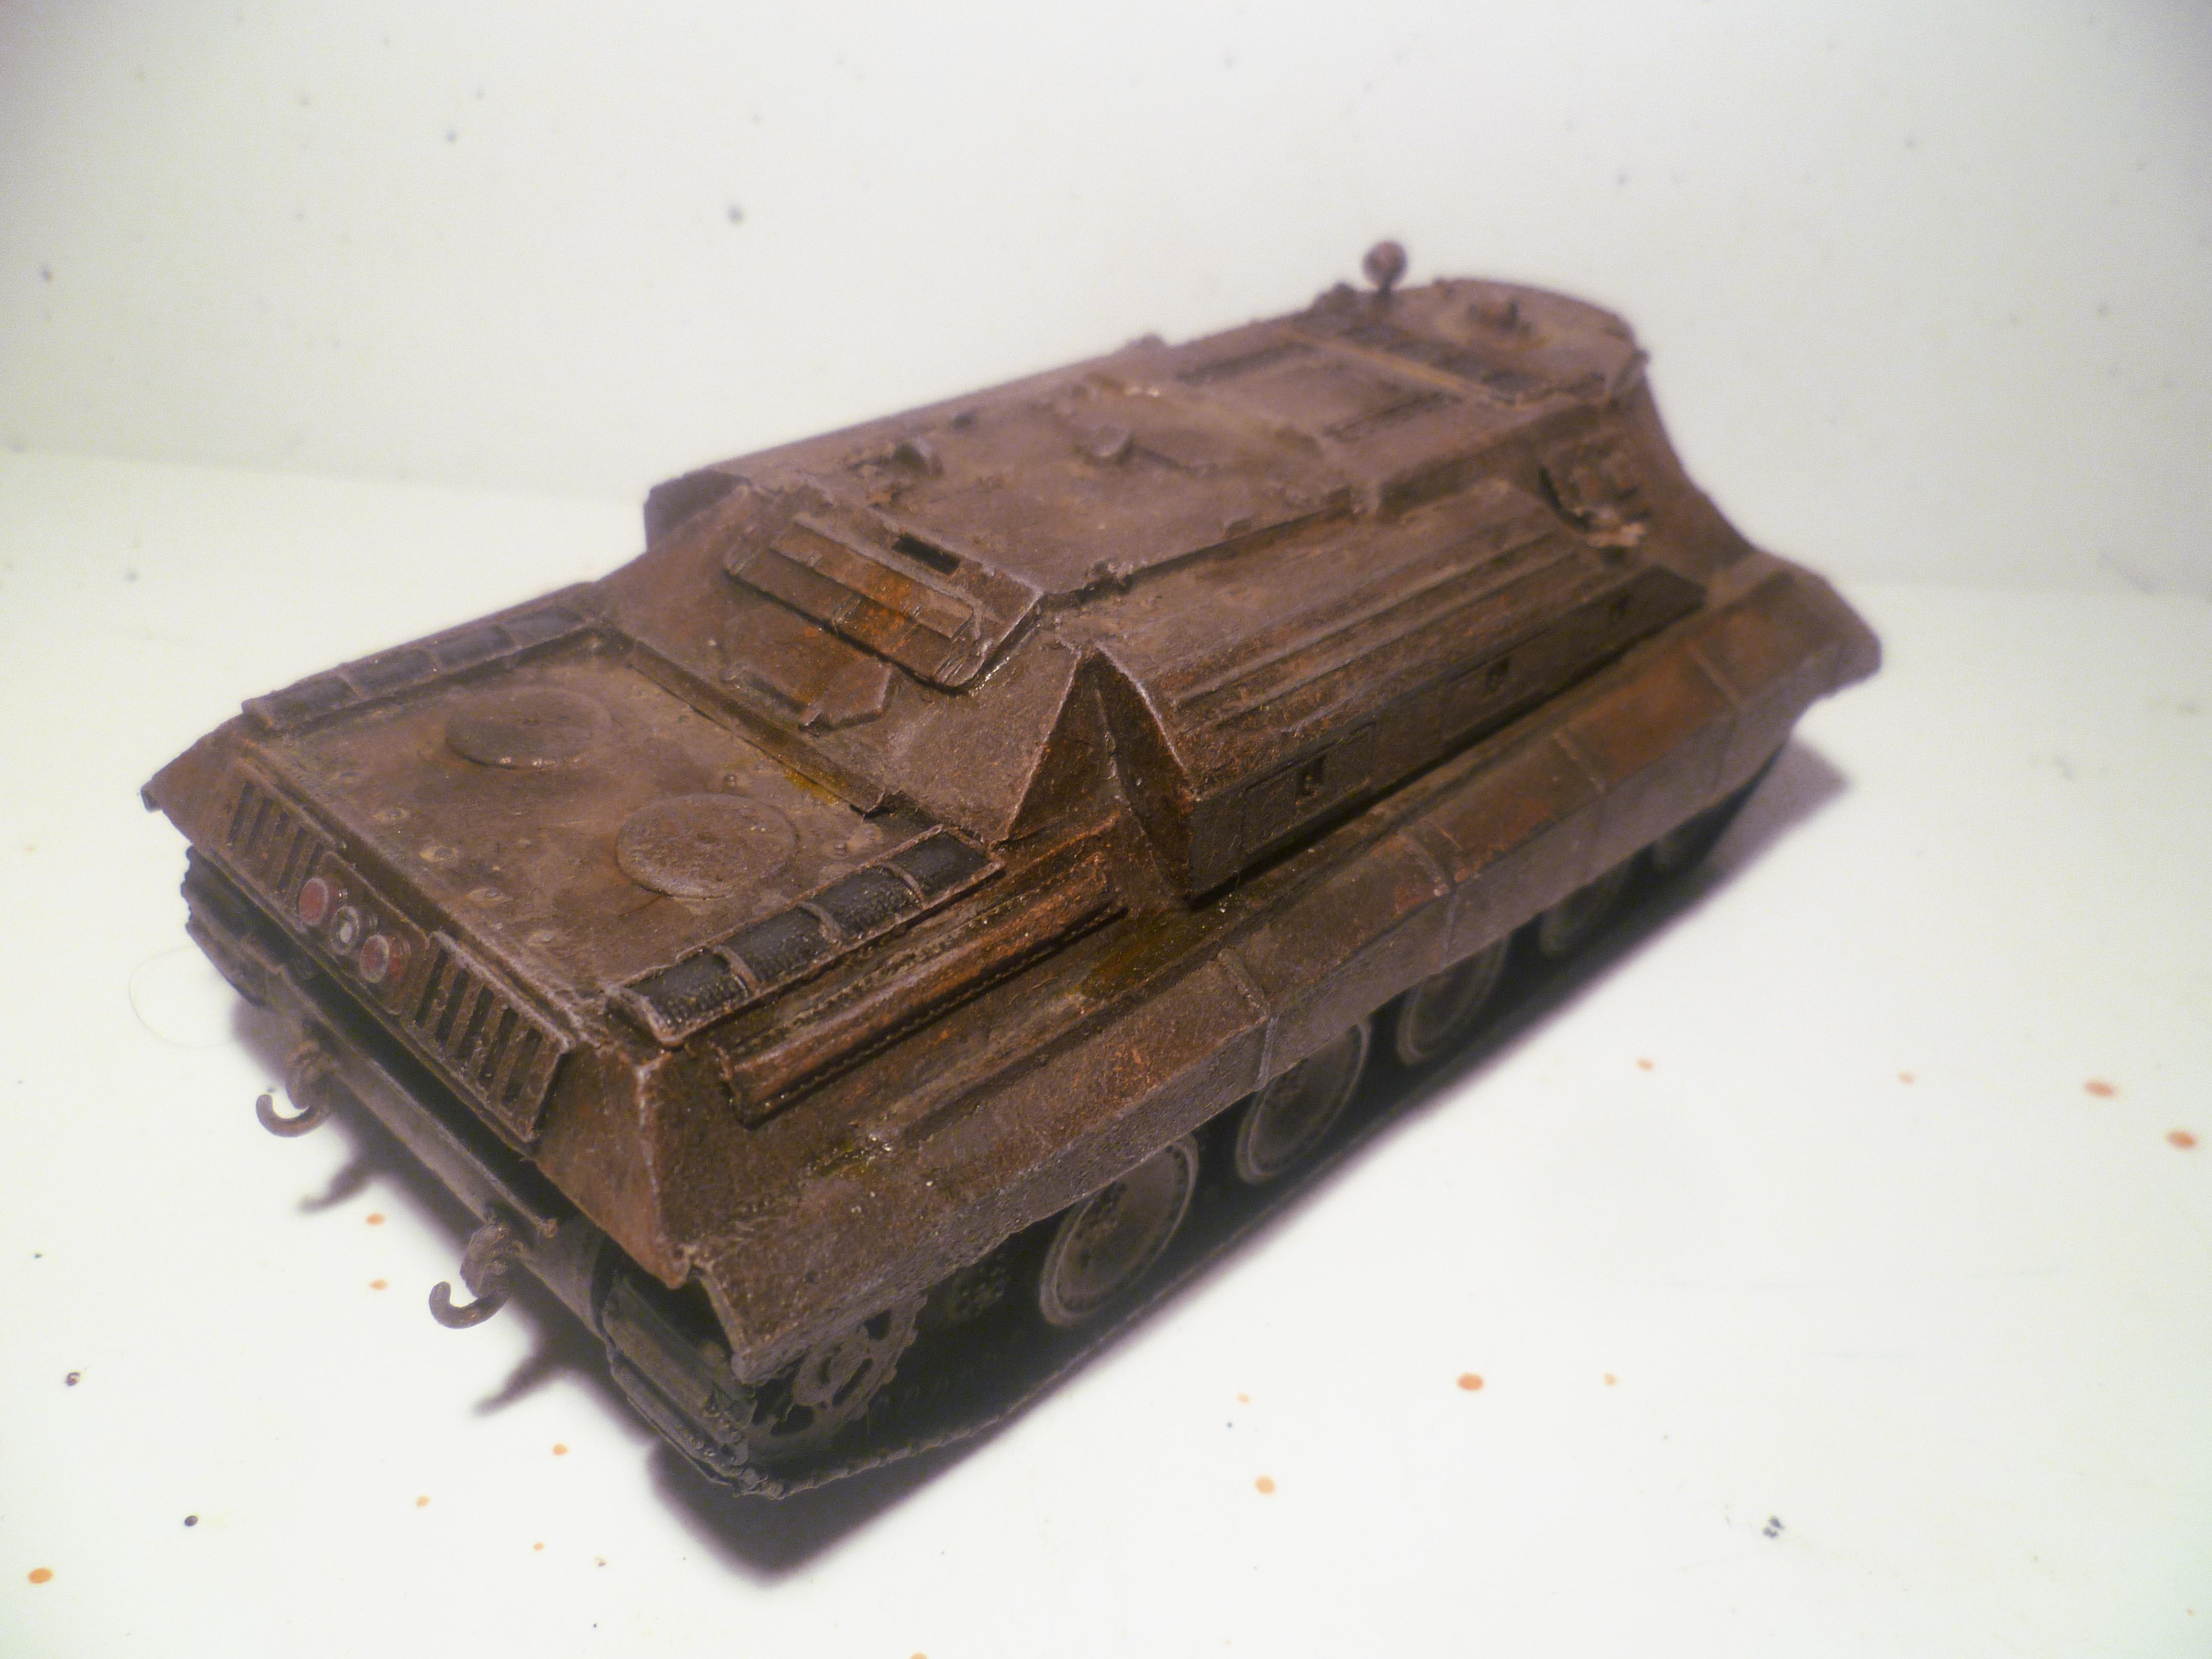 Apocalyptic, Cargo, Conversion, Hauler, Industrial, Old, Post, Rust, Star Wars, Tank, Tractor, Wreck